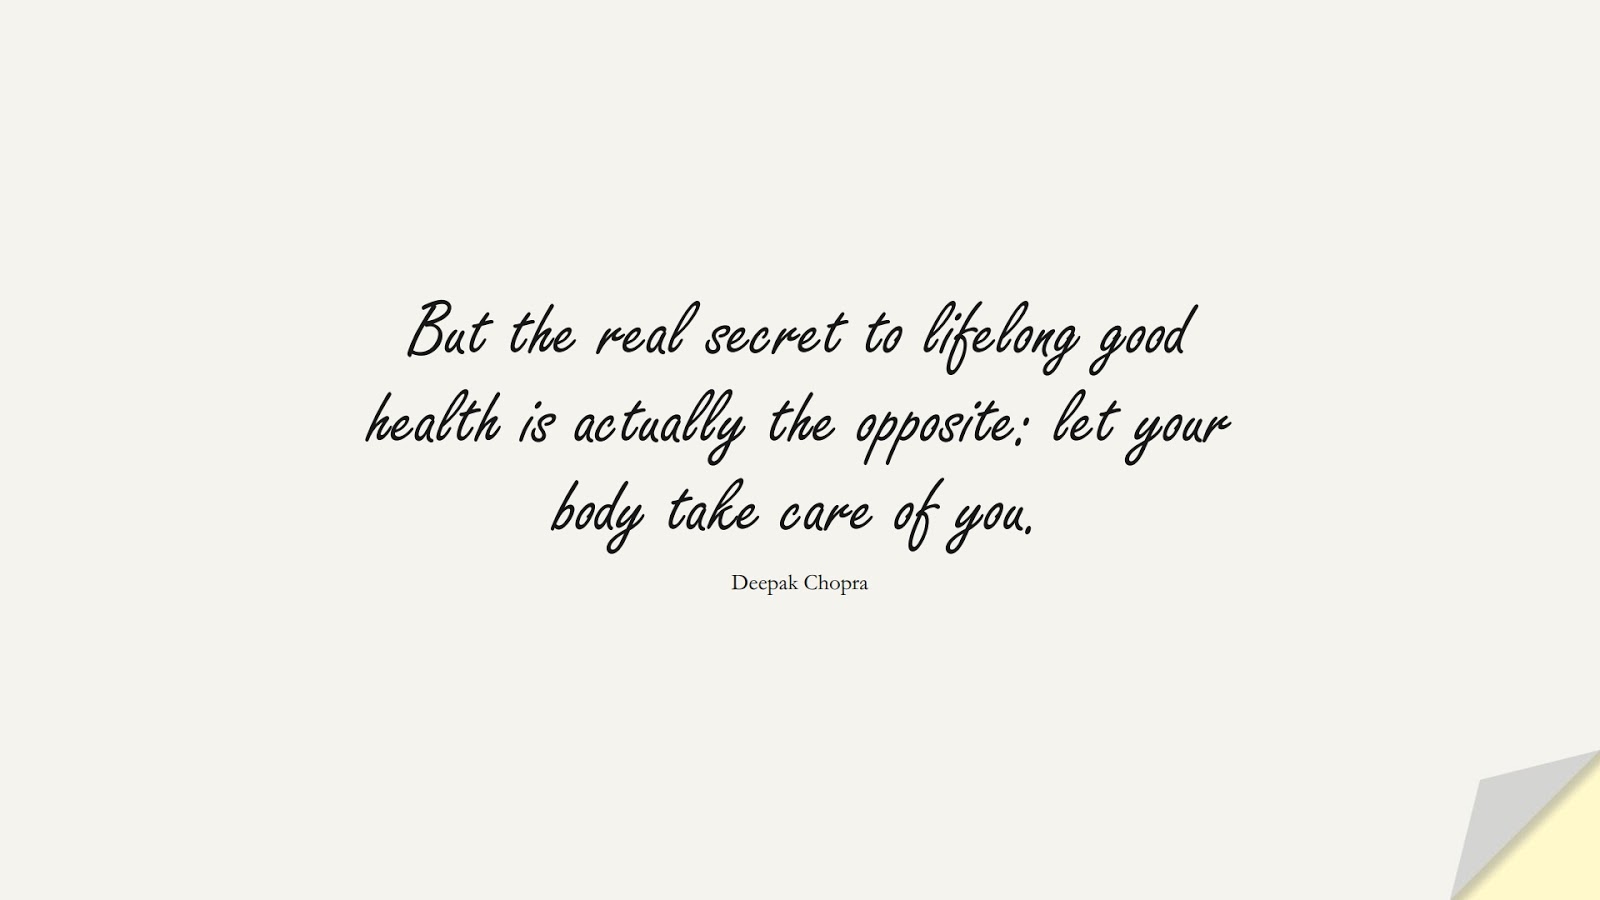 But the real secret to lifelong good health is actually the opposite: let your body take care of you. (Deepak Chopra);  #HealthQuotes